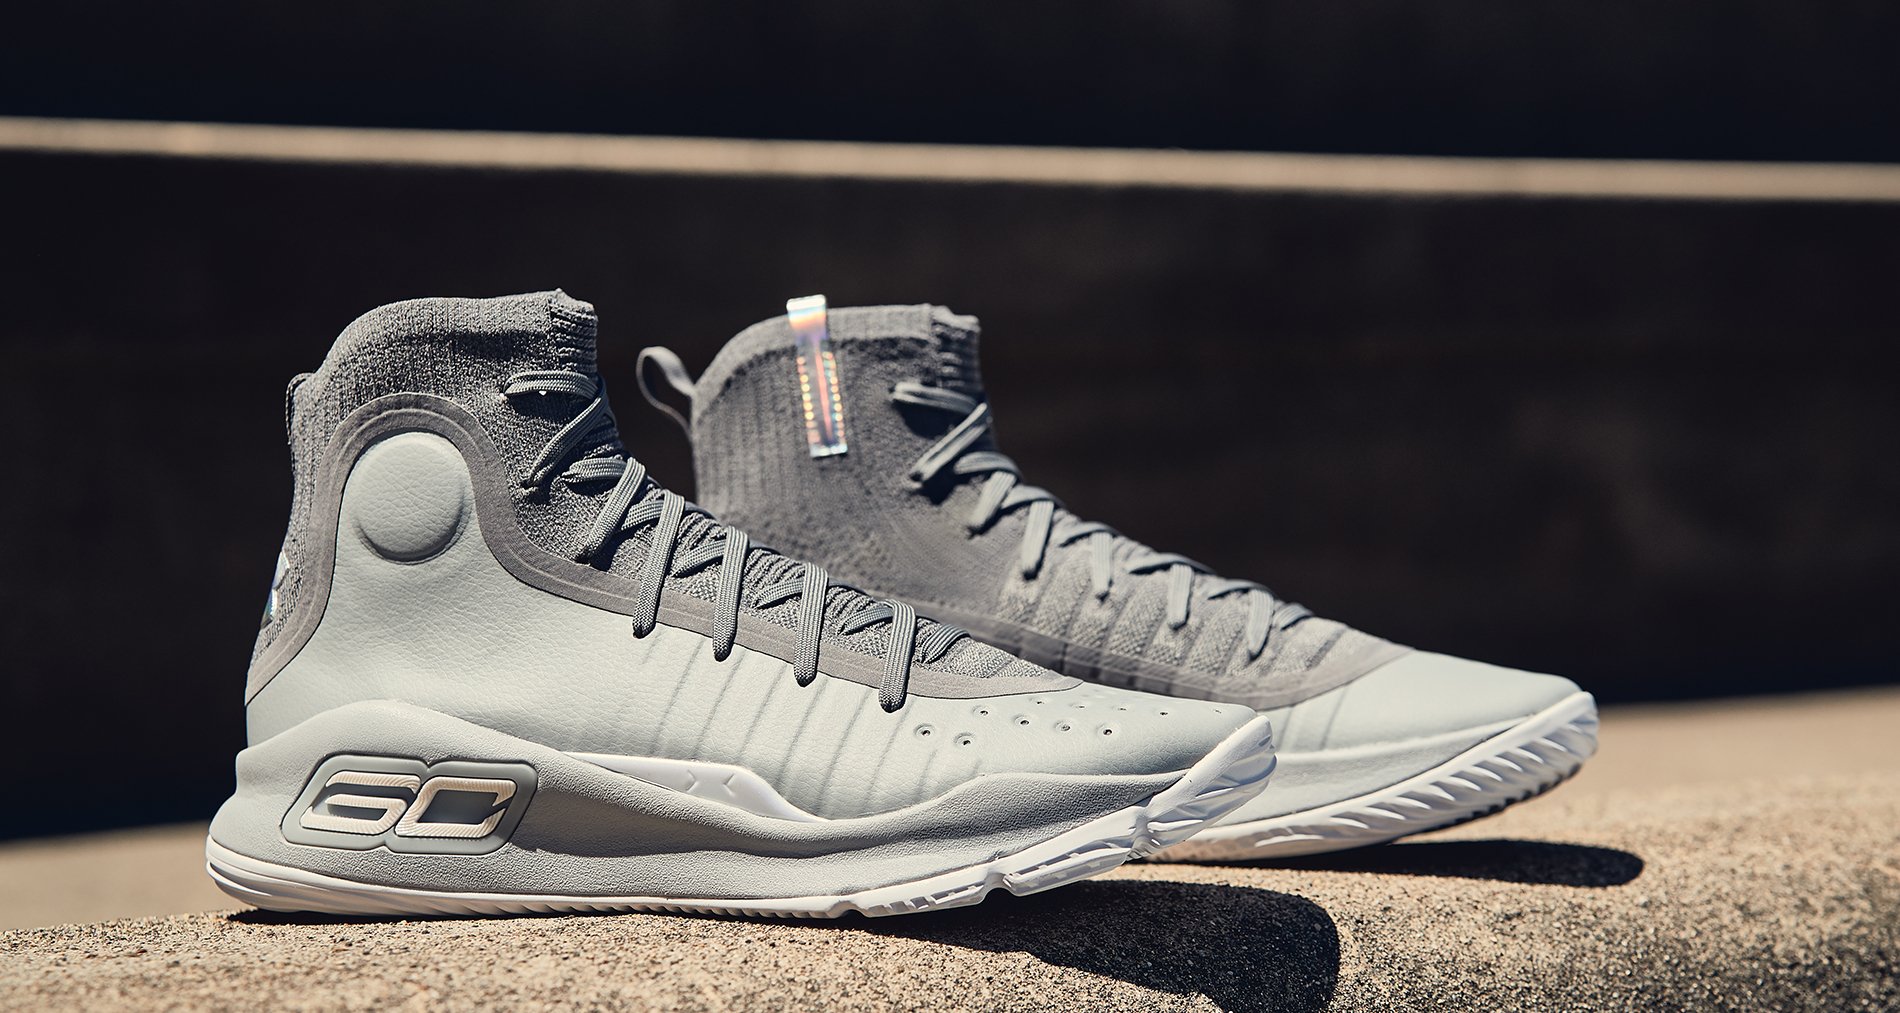 Under Armour Curry 4 "More Buckets"